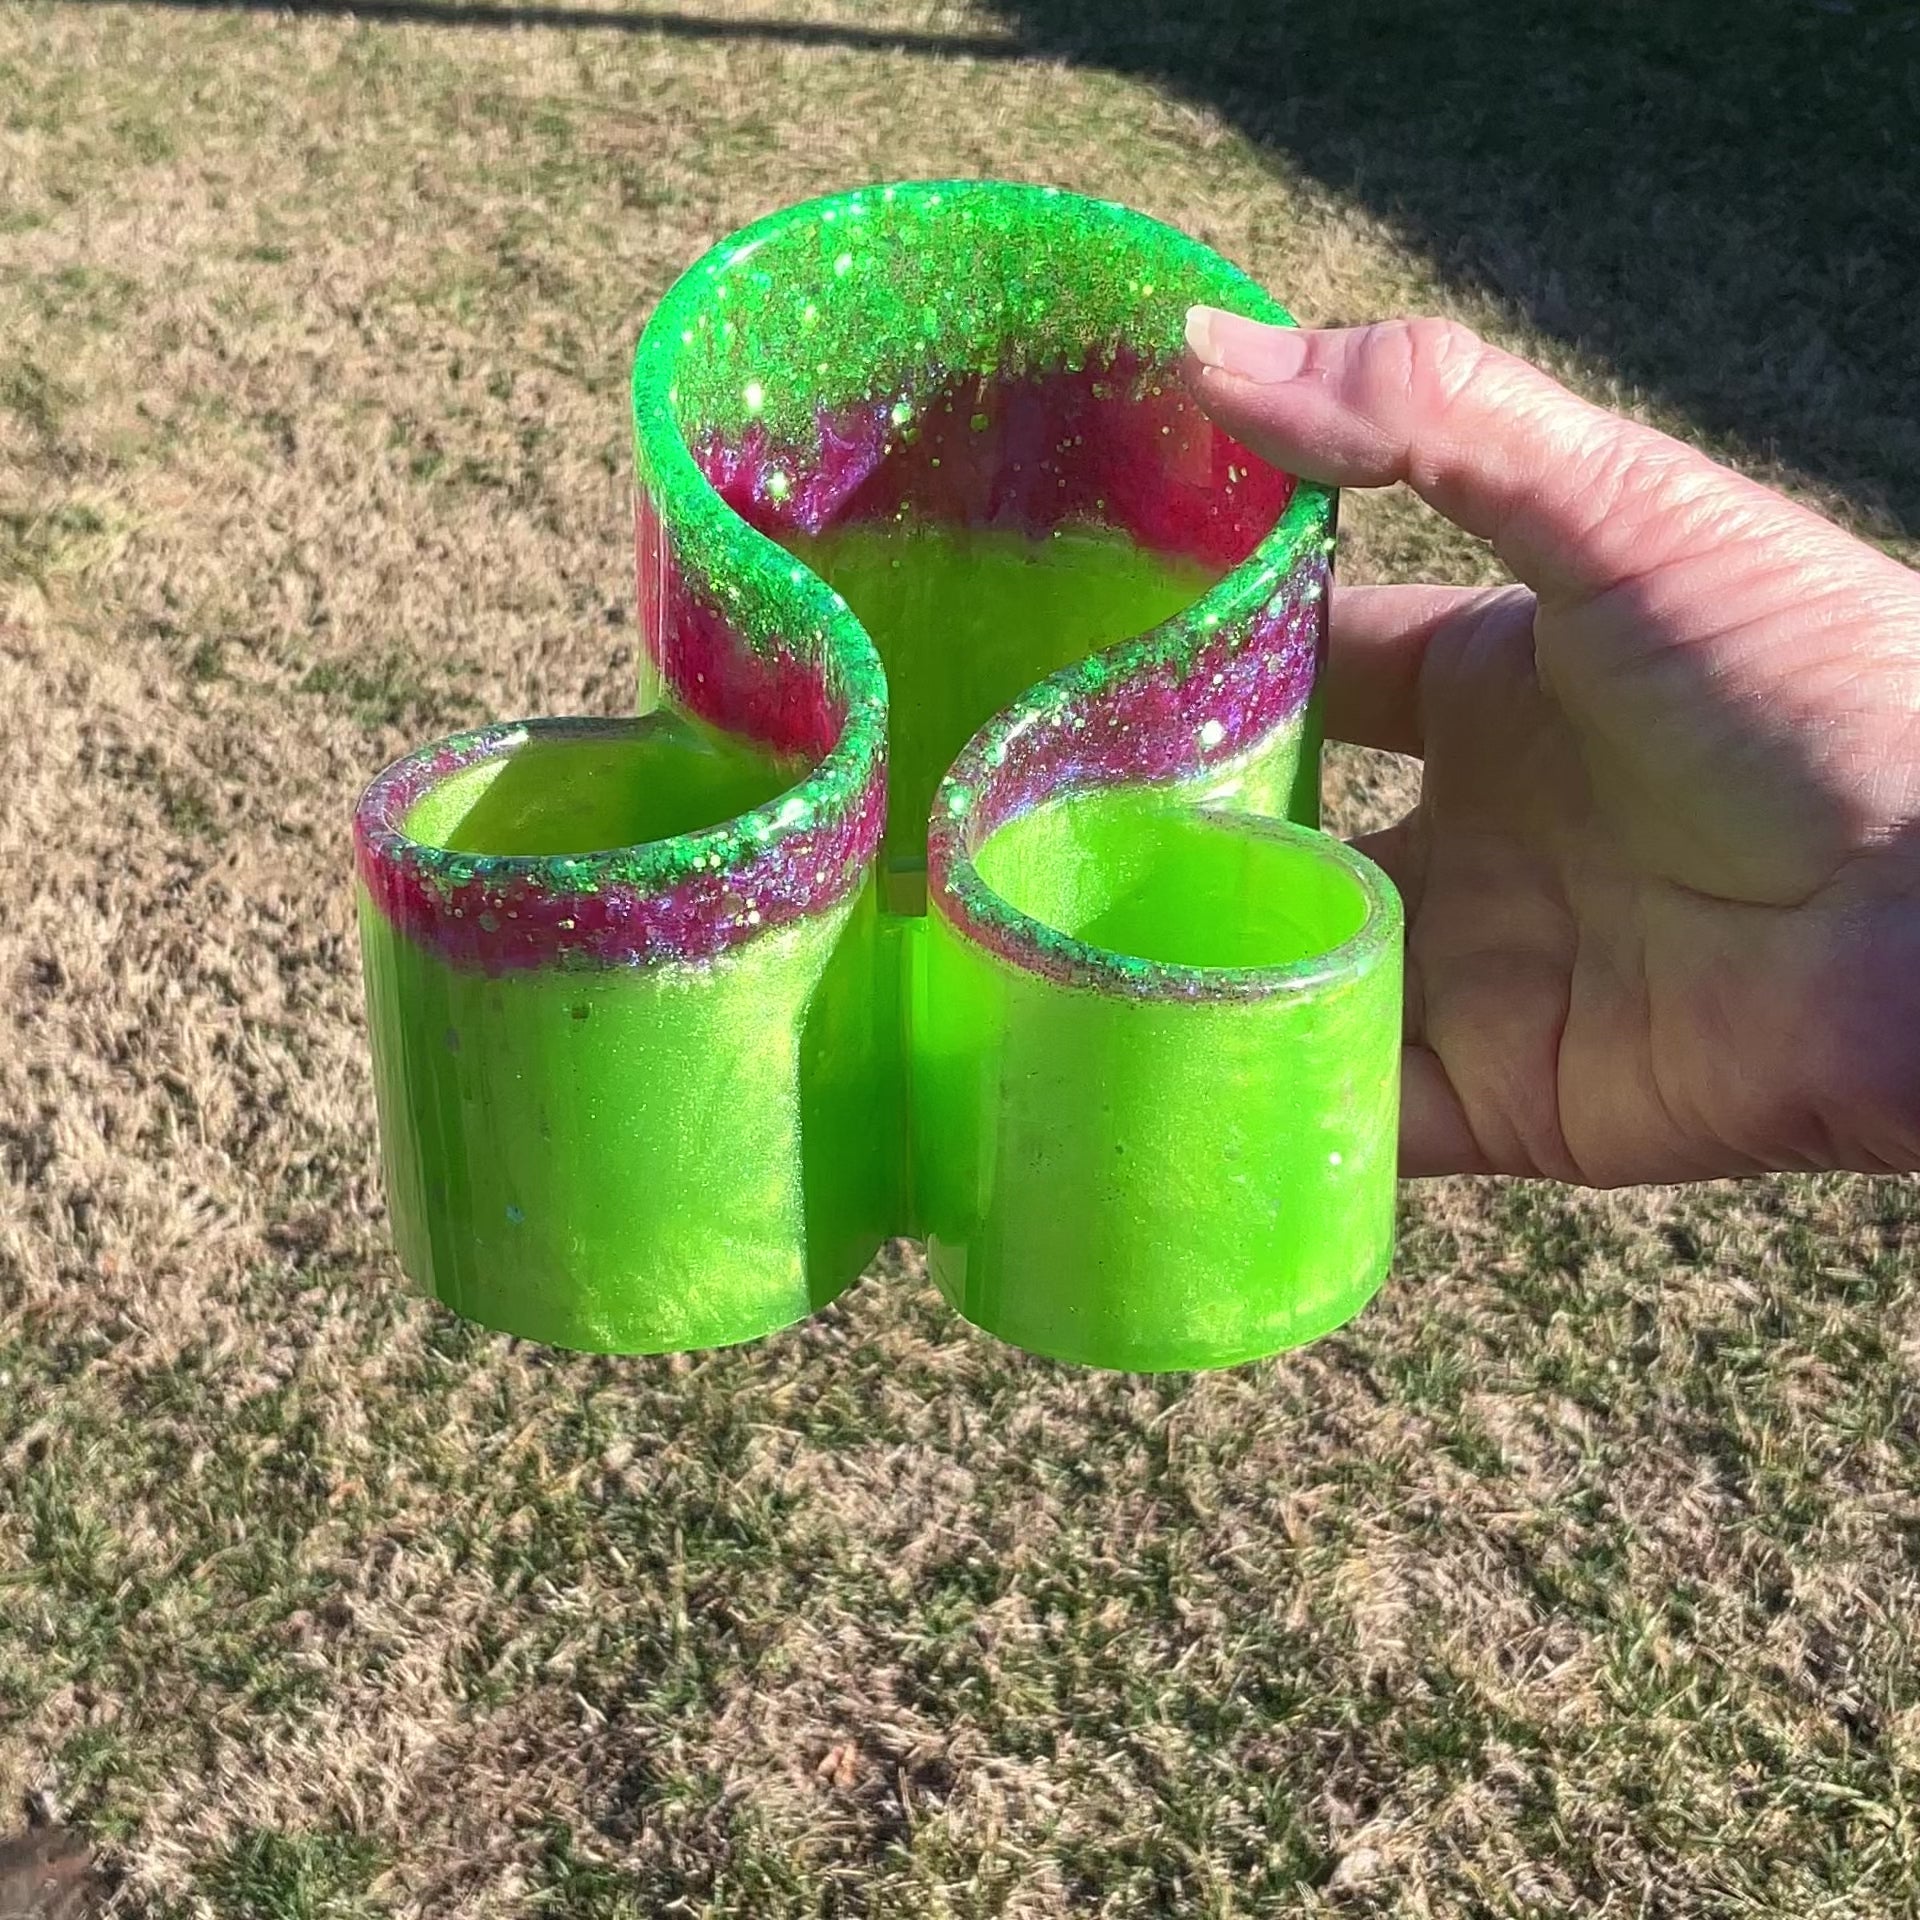 Handmade Lime Green and Pink Resin Makeup Brush Holder with Iridescent Glitter video showing how the glitter sparkles in the light.